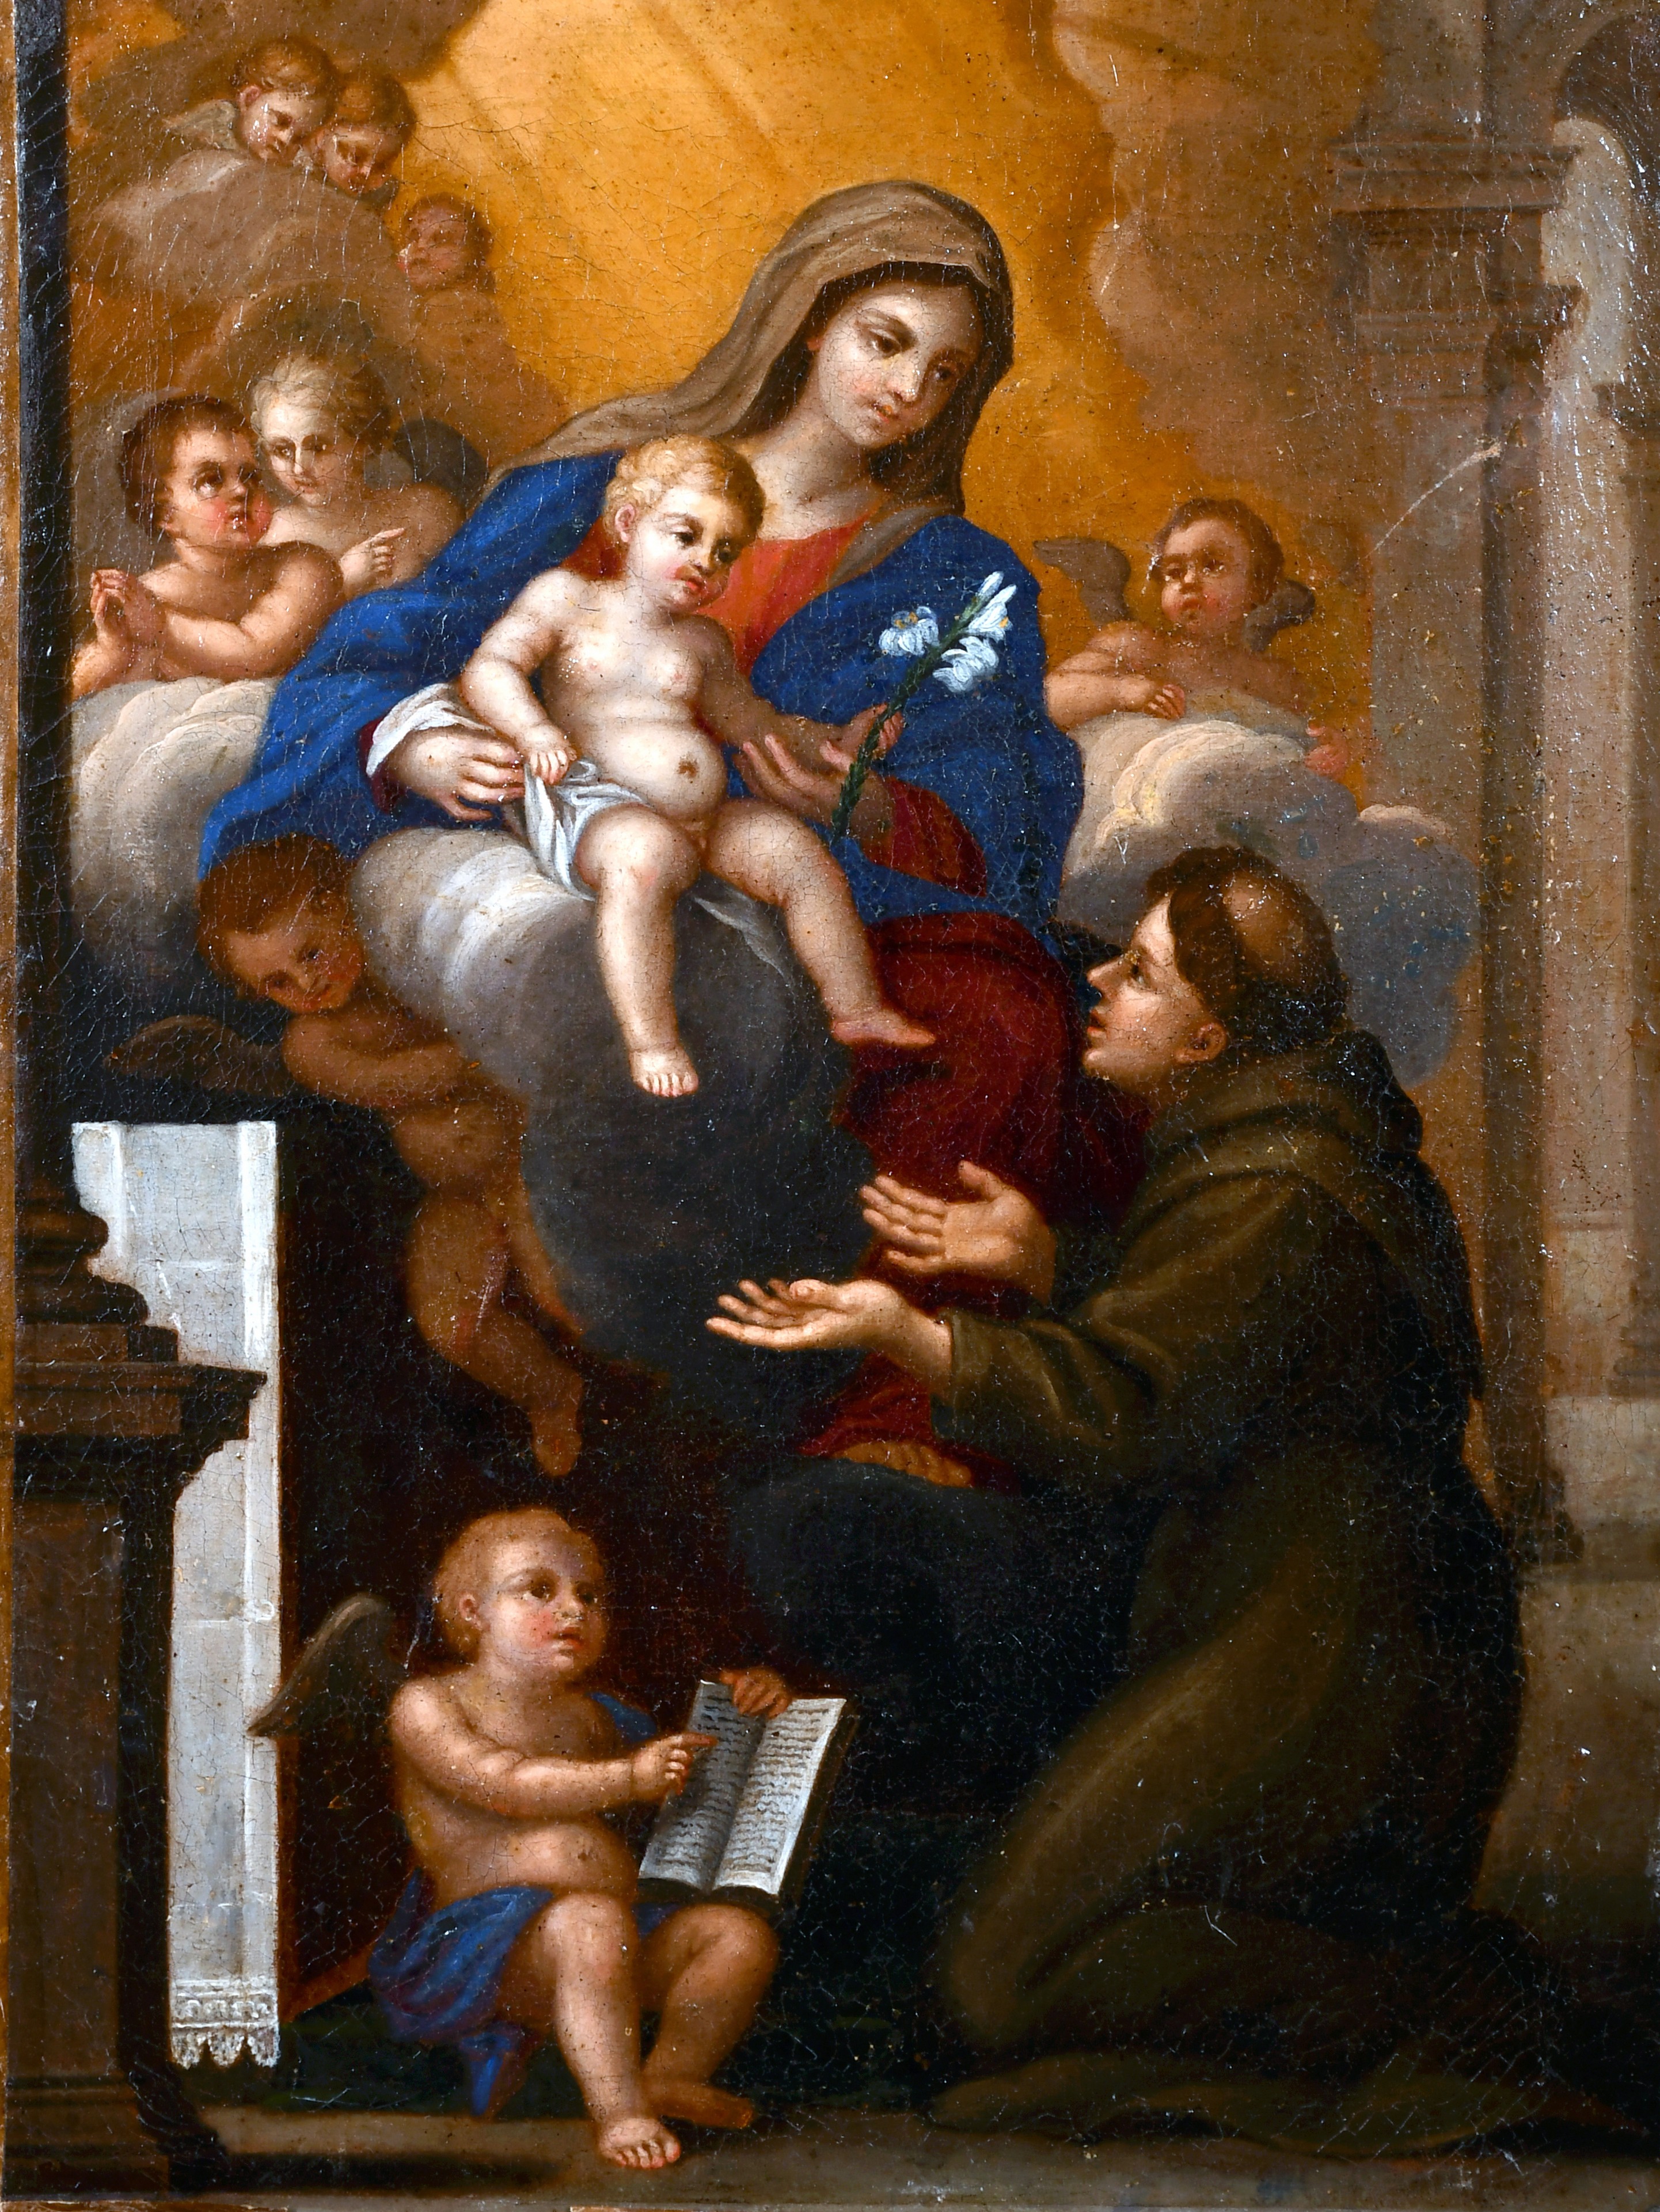 17th Century Italian School. The Madonna and Child with Attendants, Oil on canvas, Unframed, 16” 12”